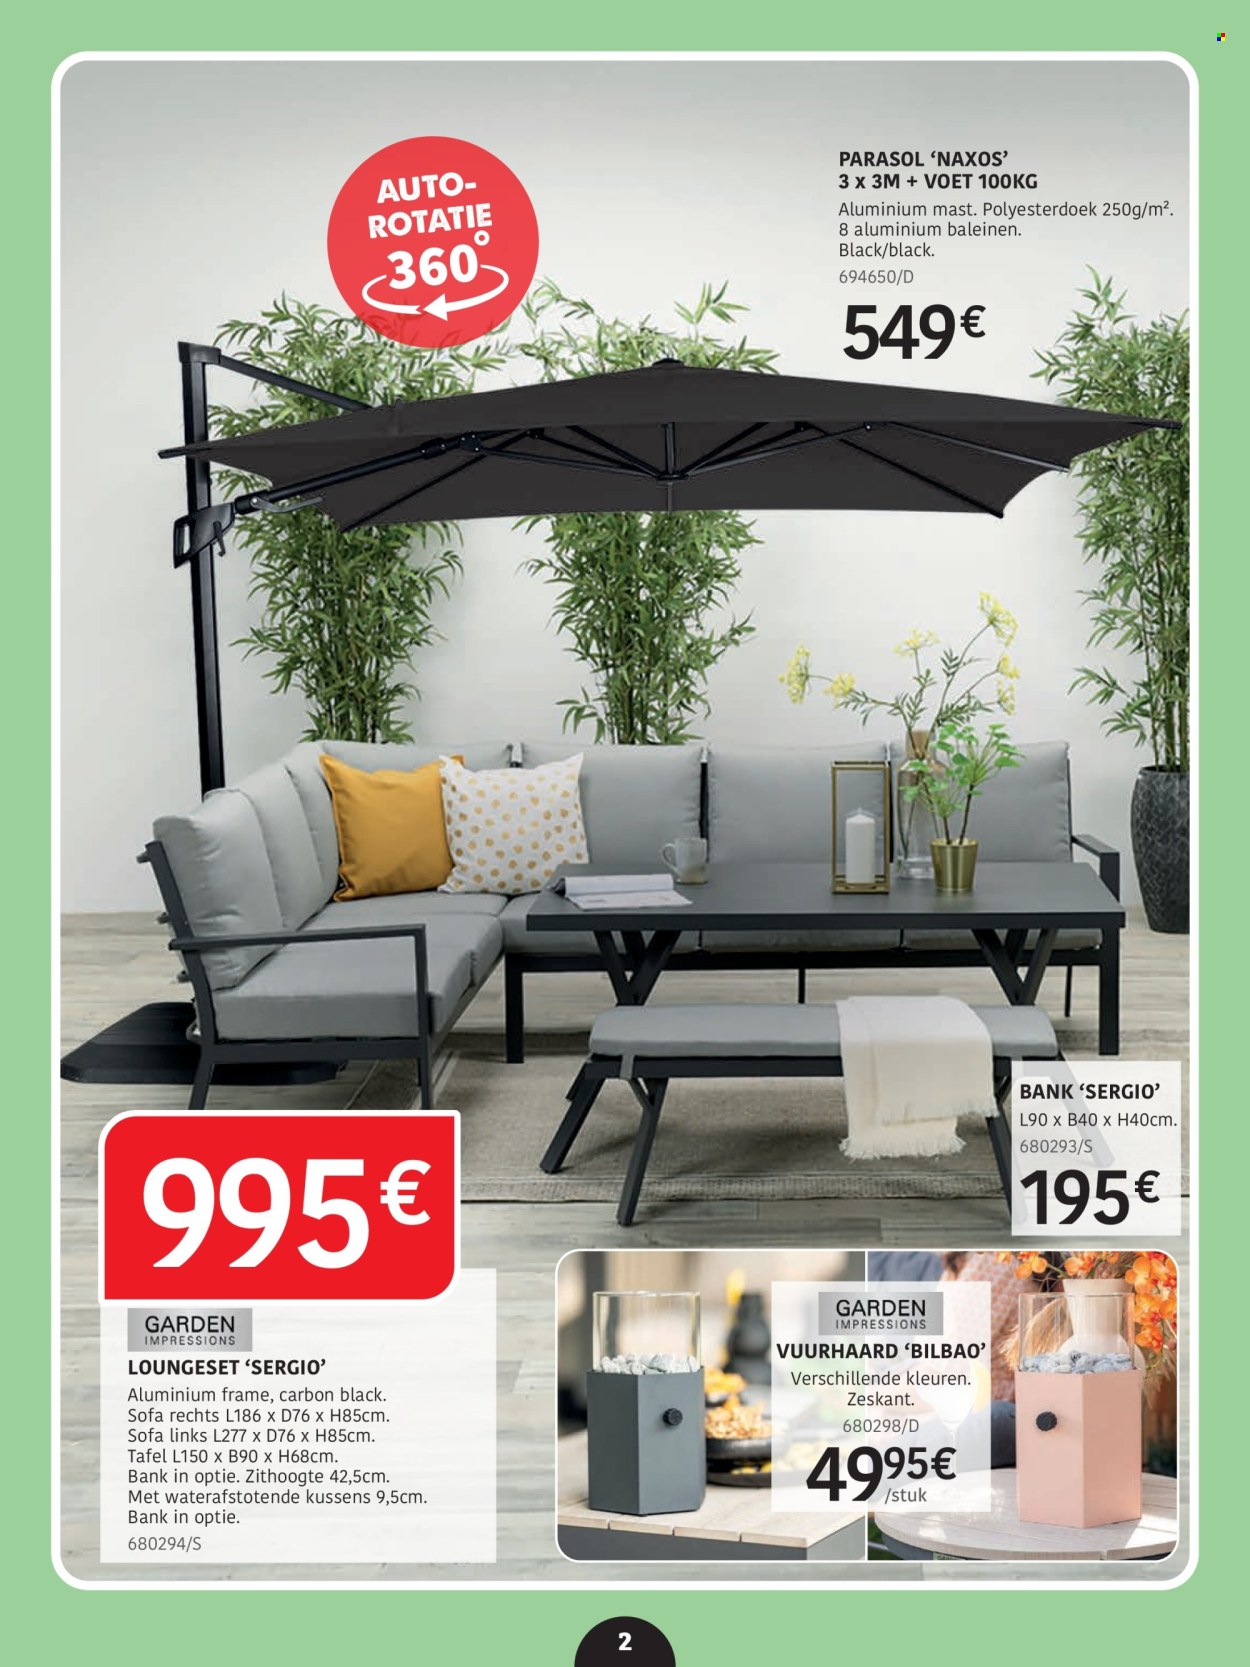 Catalogue HandyHome - 4.4.2024 - 30.6.2024. Page 2.